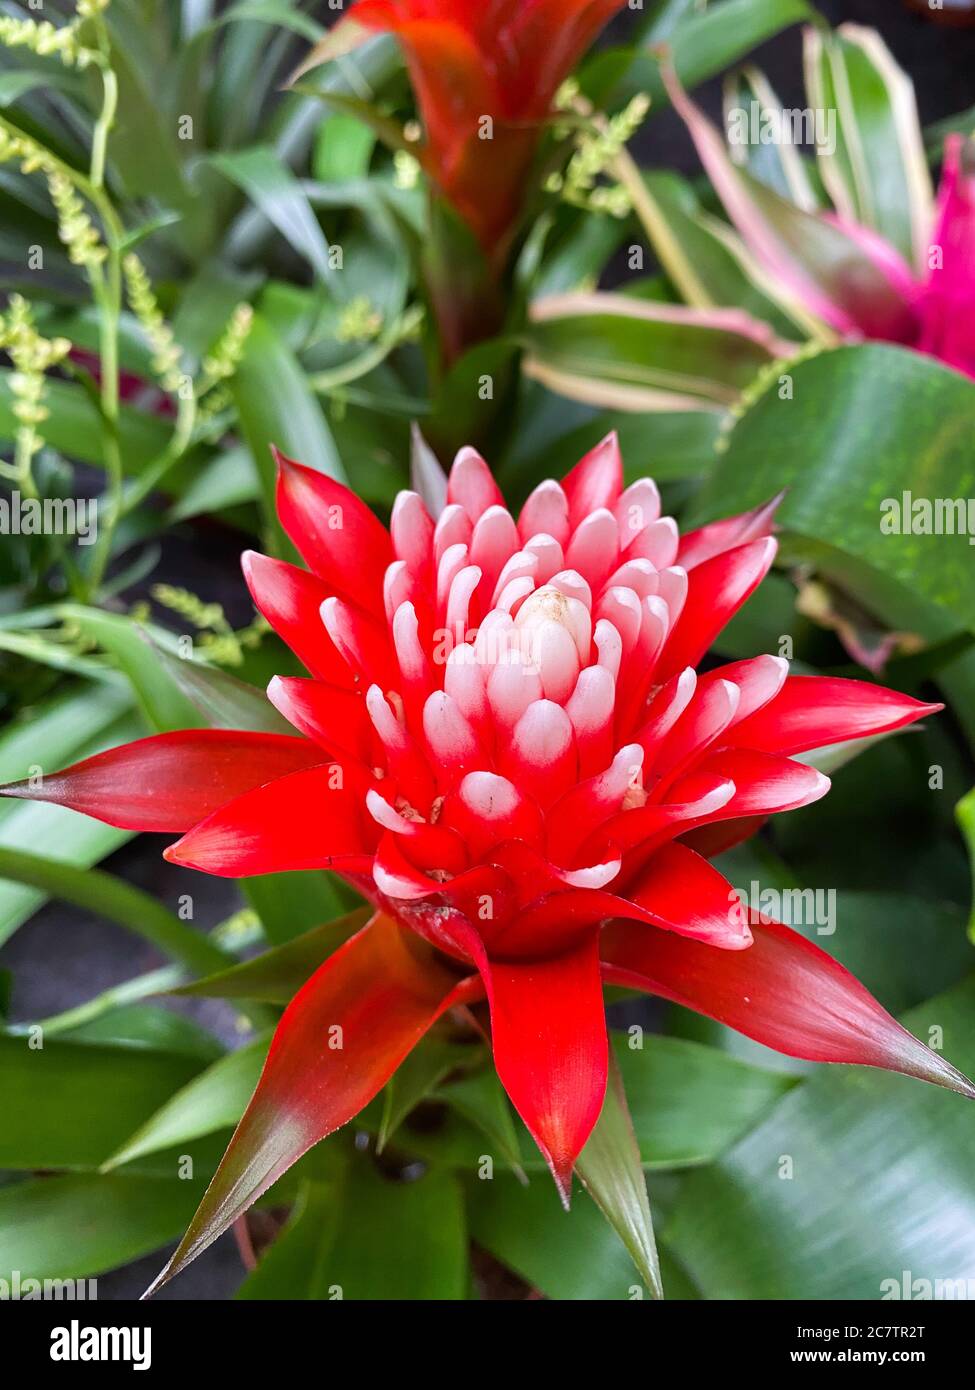 Top view closeup of isolated beautiful red and white flower head (bromelia guzmania desautelsii) with green leaves background Stock Photo